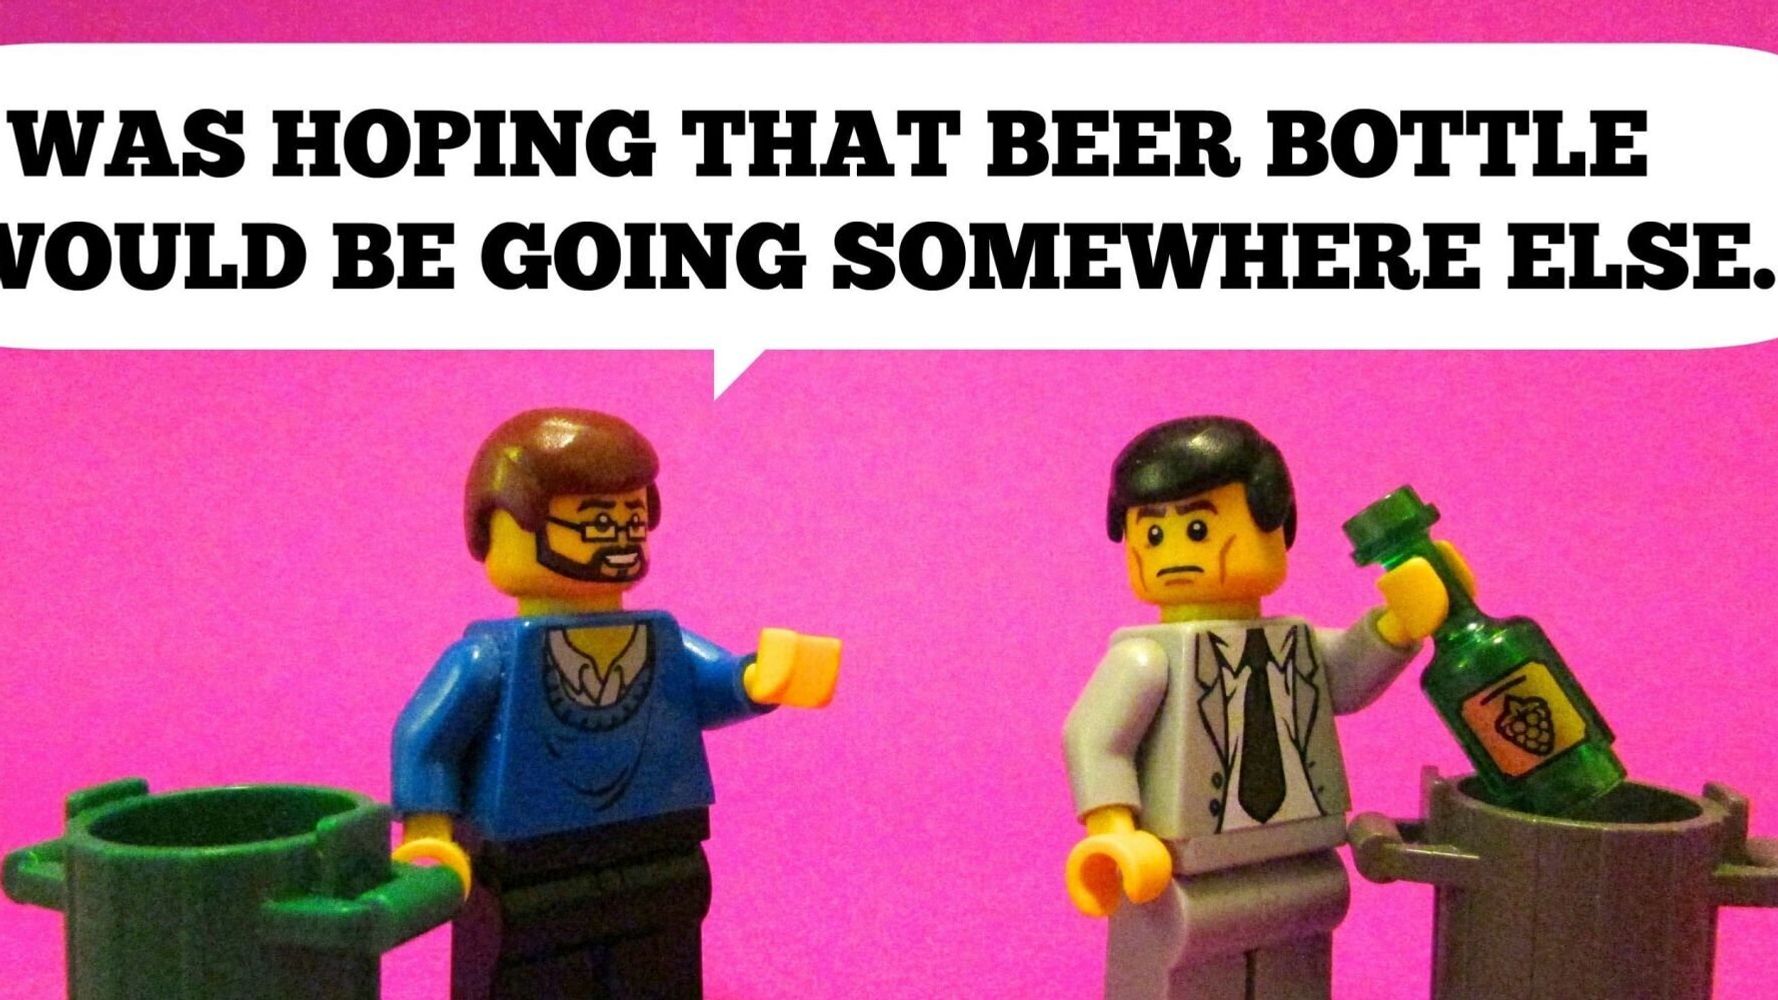 Naked Cartoon Legos - Porn Comments Illustrated With Lego | HuffPost UK Comedy